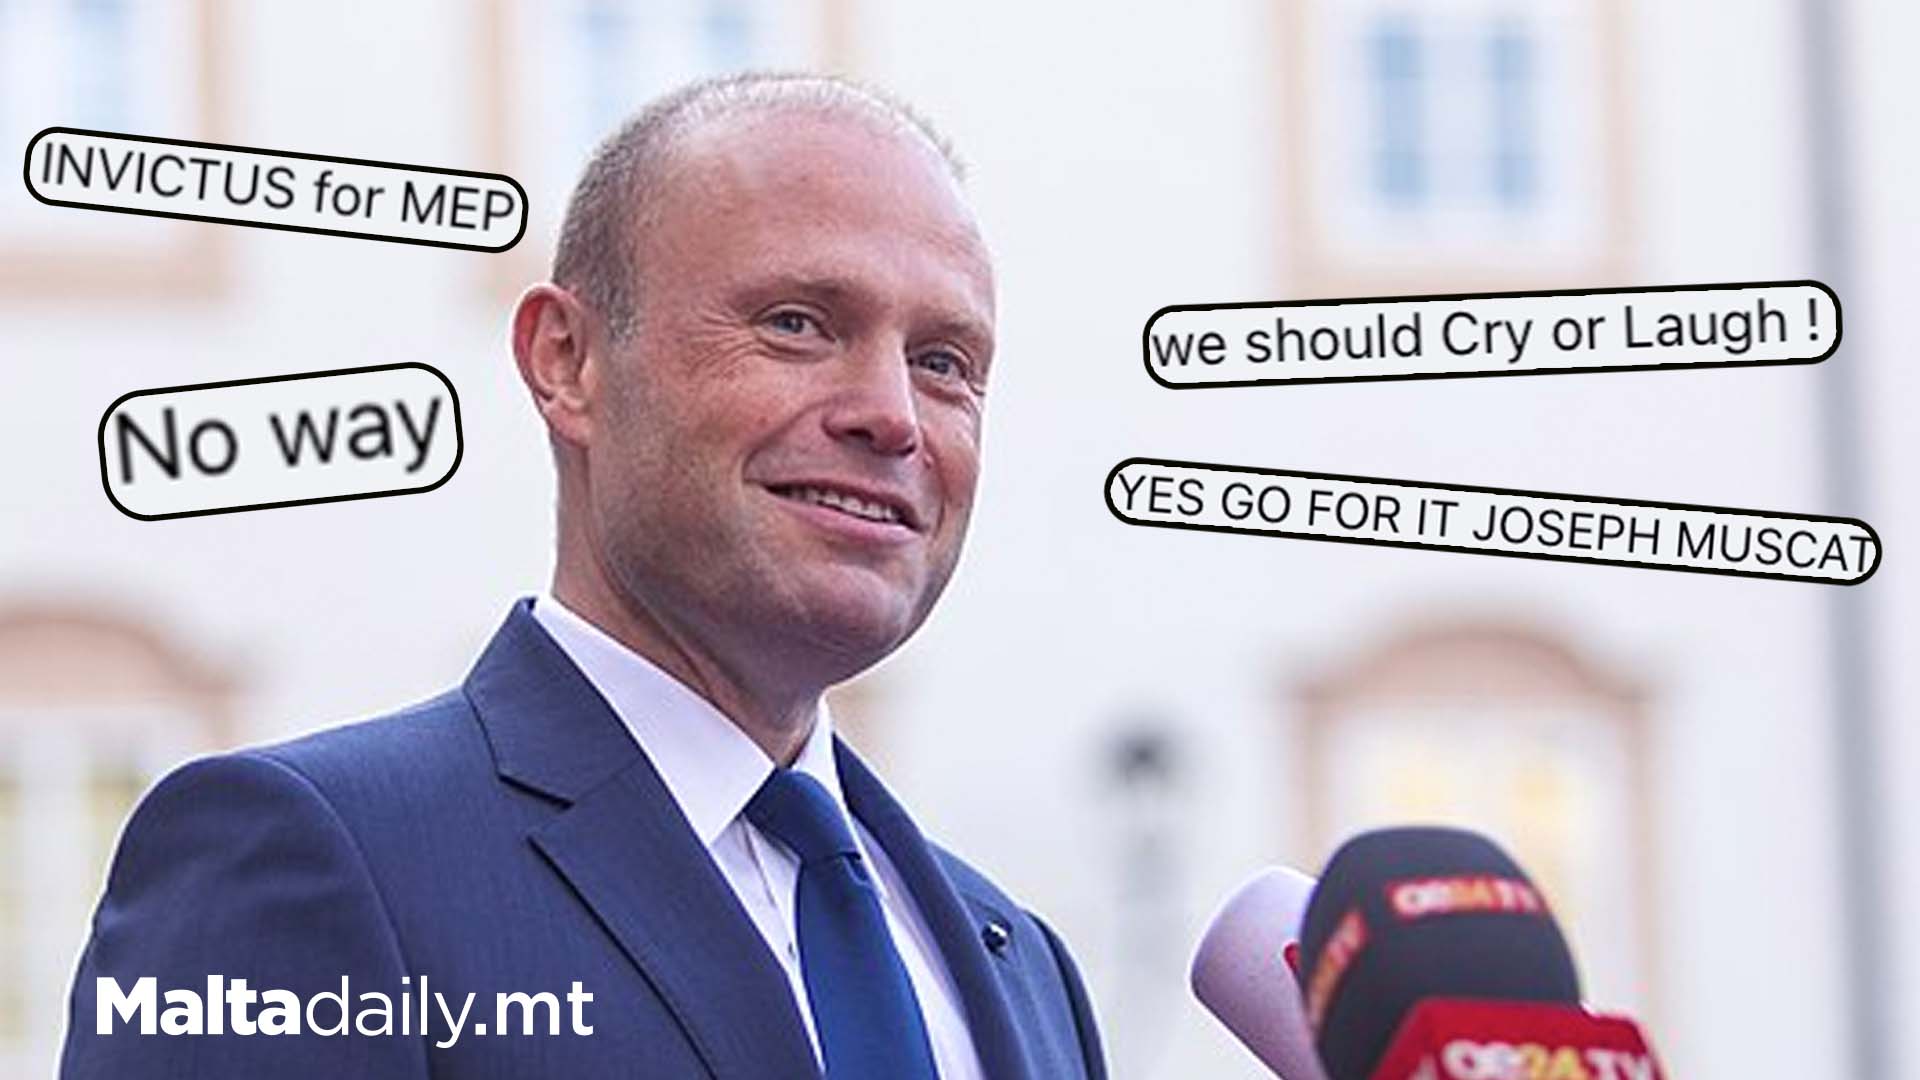 Here's What People Think Of Joseph Muscat Running For MEP